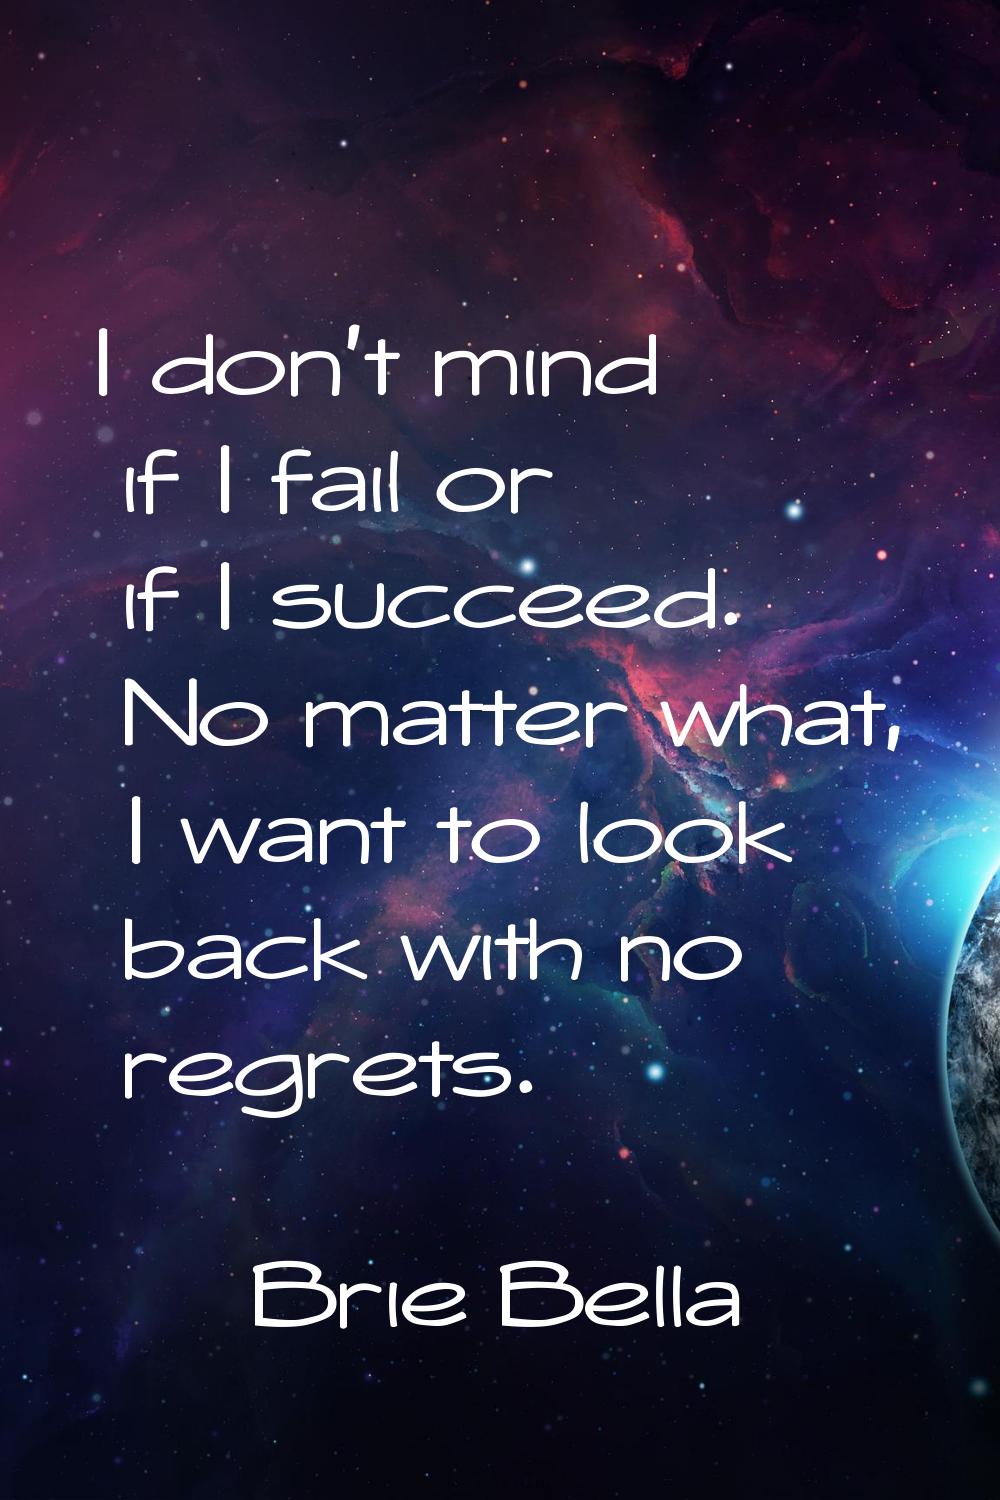 I don't mind if I fail or if I succeed. No matter what, I want to look back with no regrets.